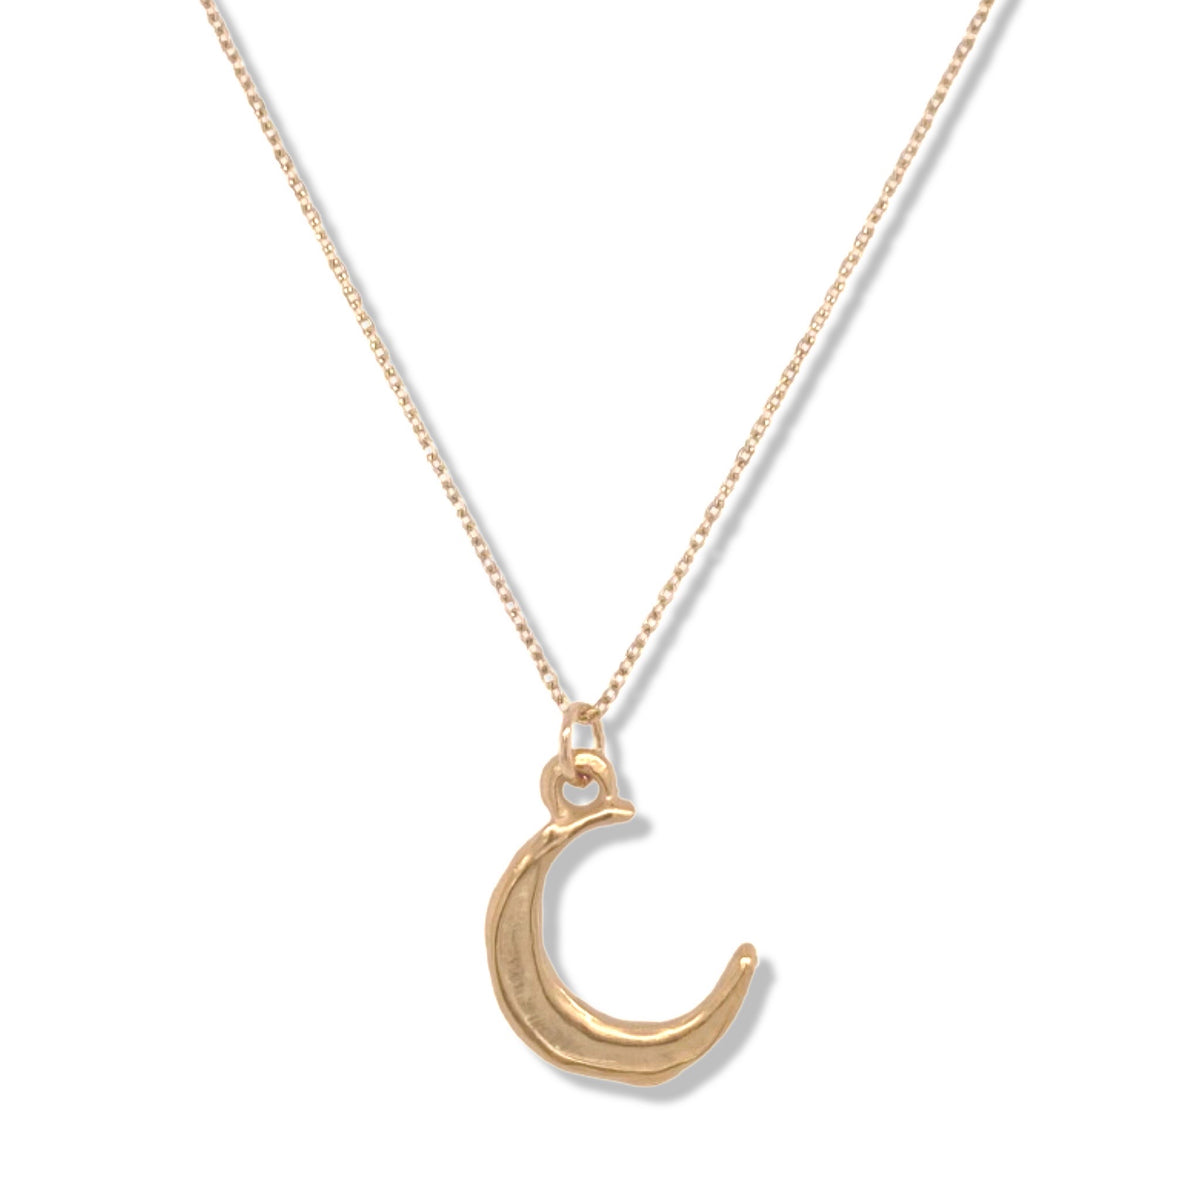 Cosmic Moon Charm Necklace in Gold | Keely SMith Jewelry | Nantucket